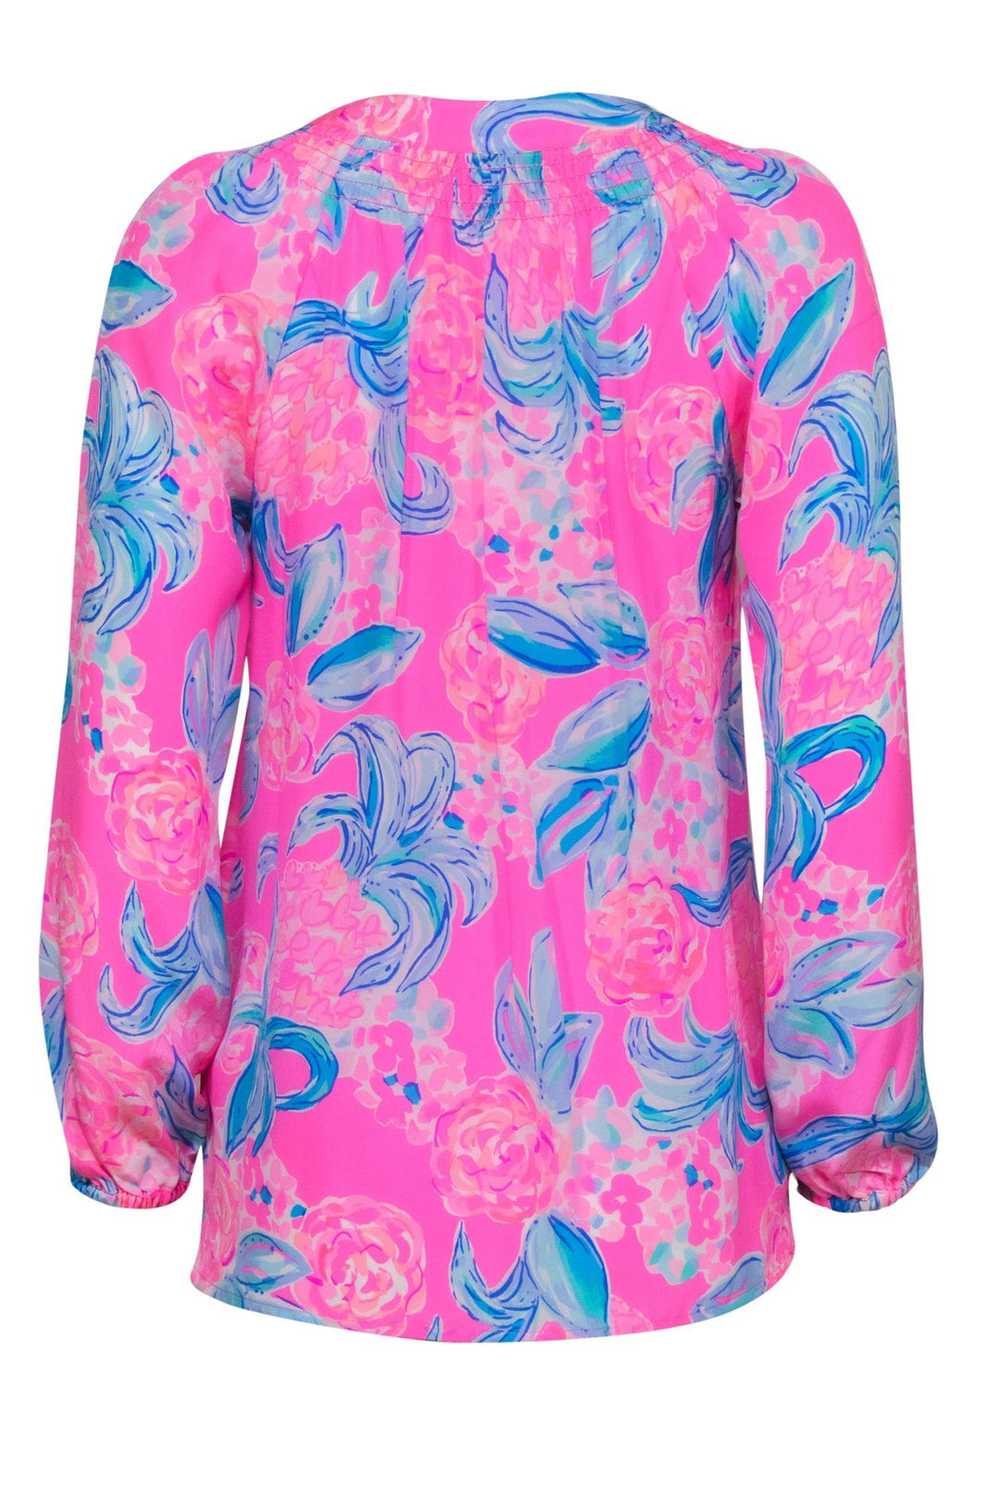 Lilly Pulitzer - Bright Pink & Blue Floral Silk P… - image 3